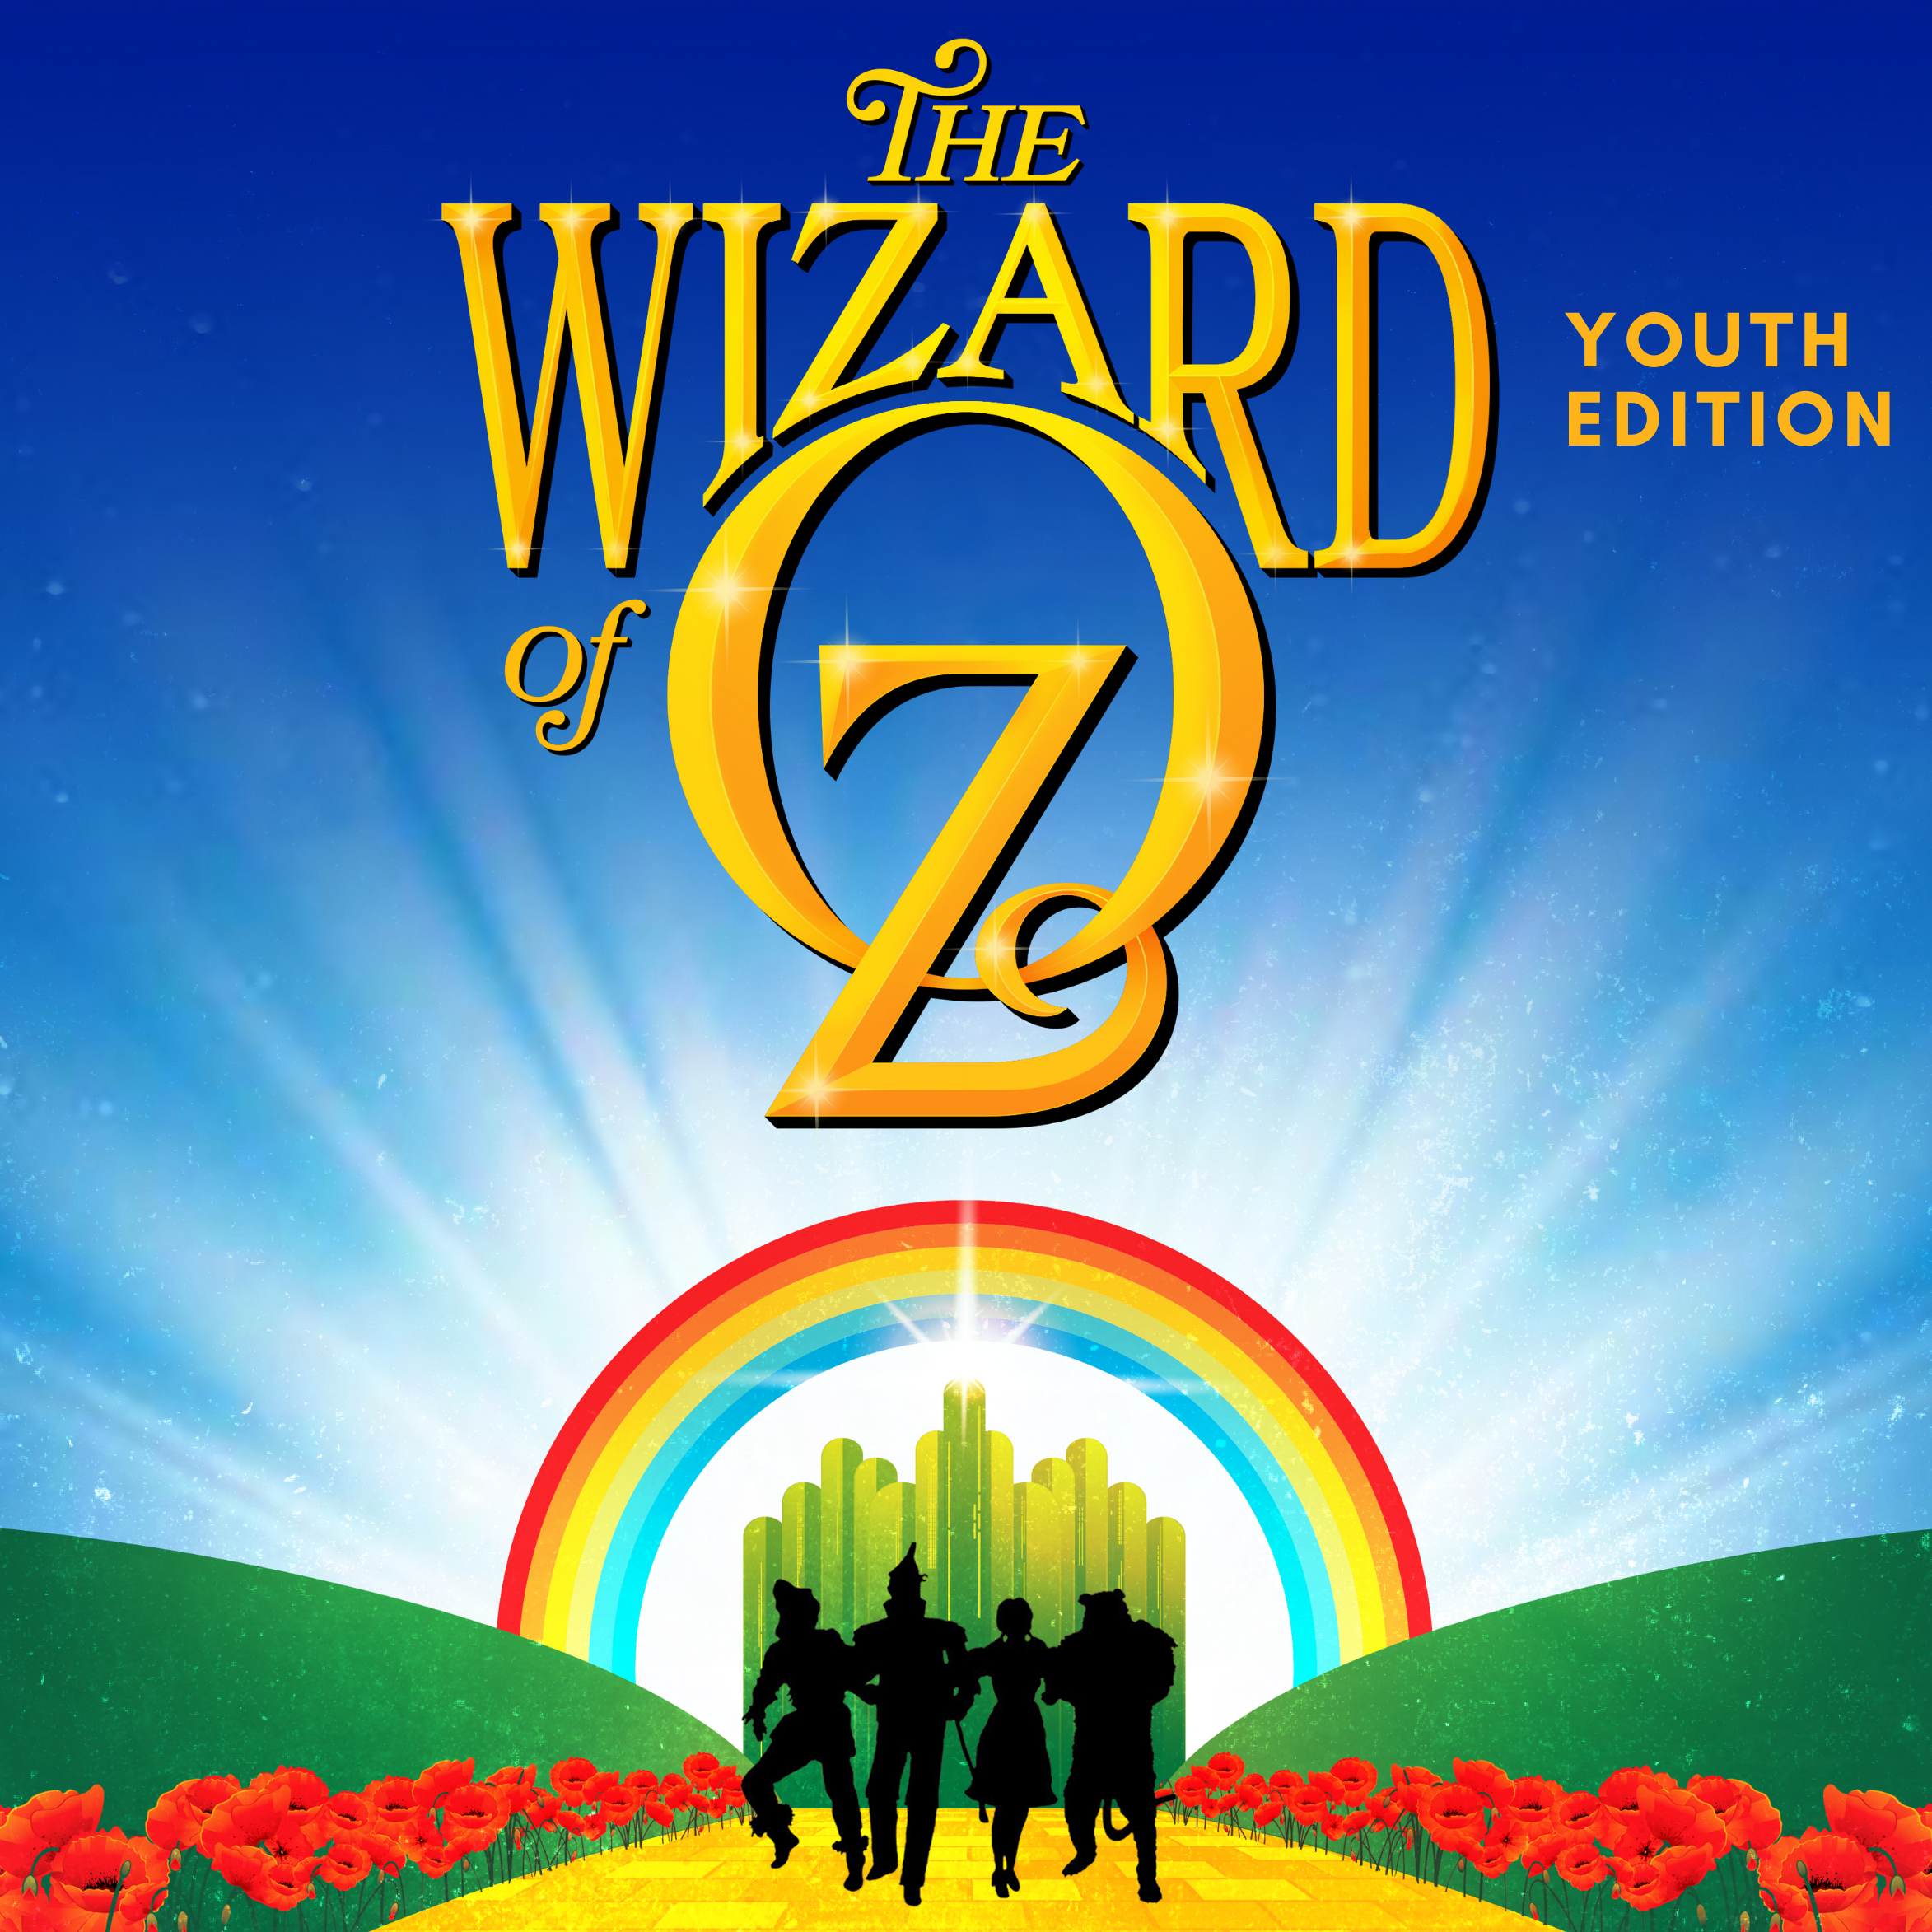 The Wizard of Oz-Youth Edition